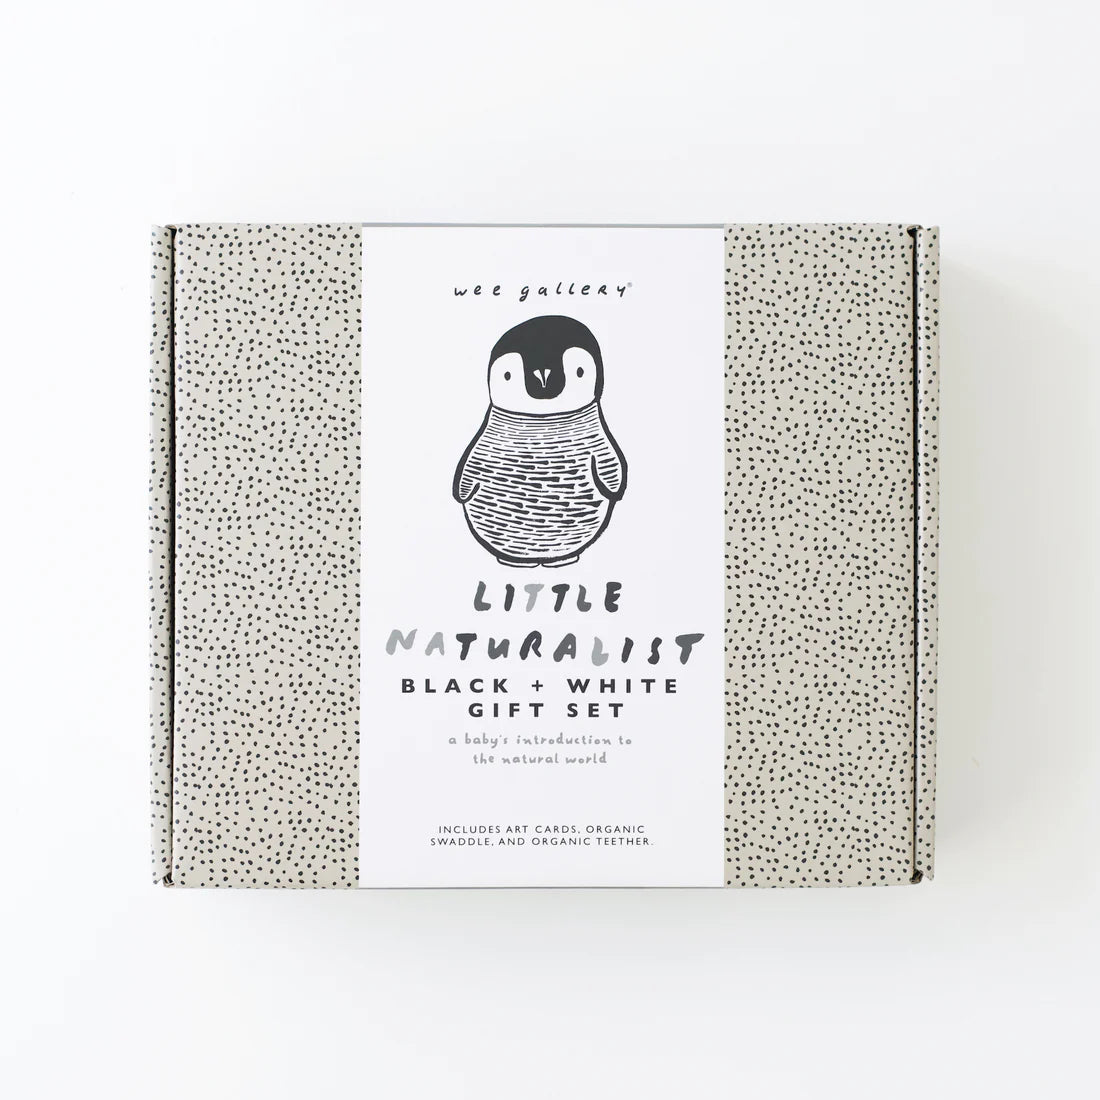 Little Naturalist Black & White Gift Set - Wee Gallery